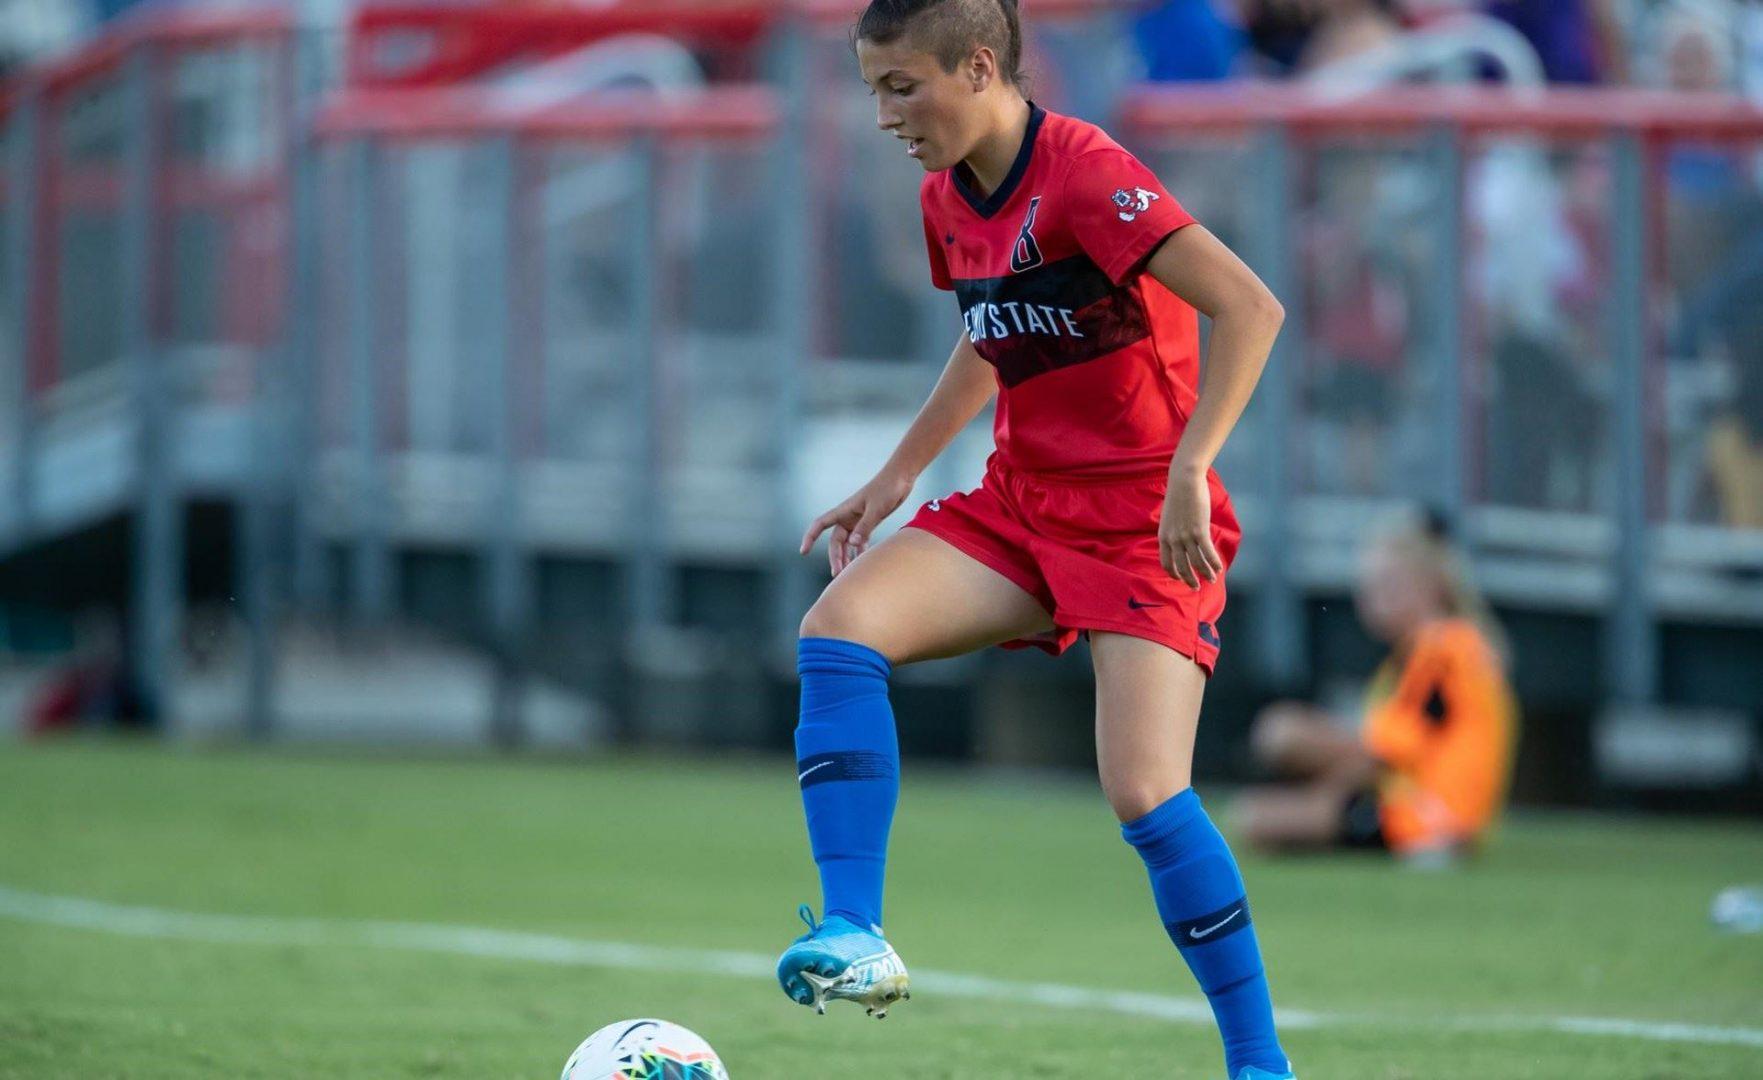 Midfielder Lorena Montanes controls the ball during a match against Boise State University at the Soccer and Lacrosse Stadium on Sunday, Oct. 6, 2019. (Photo courtesy of Fresno State Athletics) 